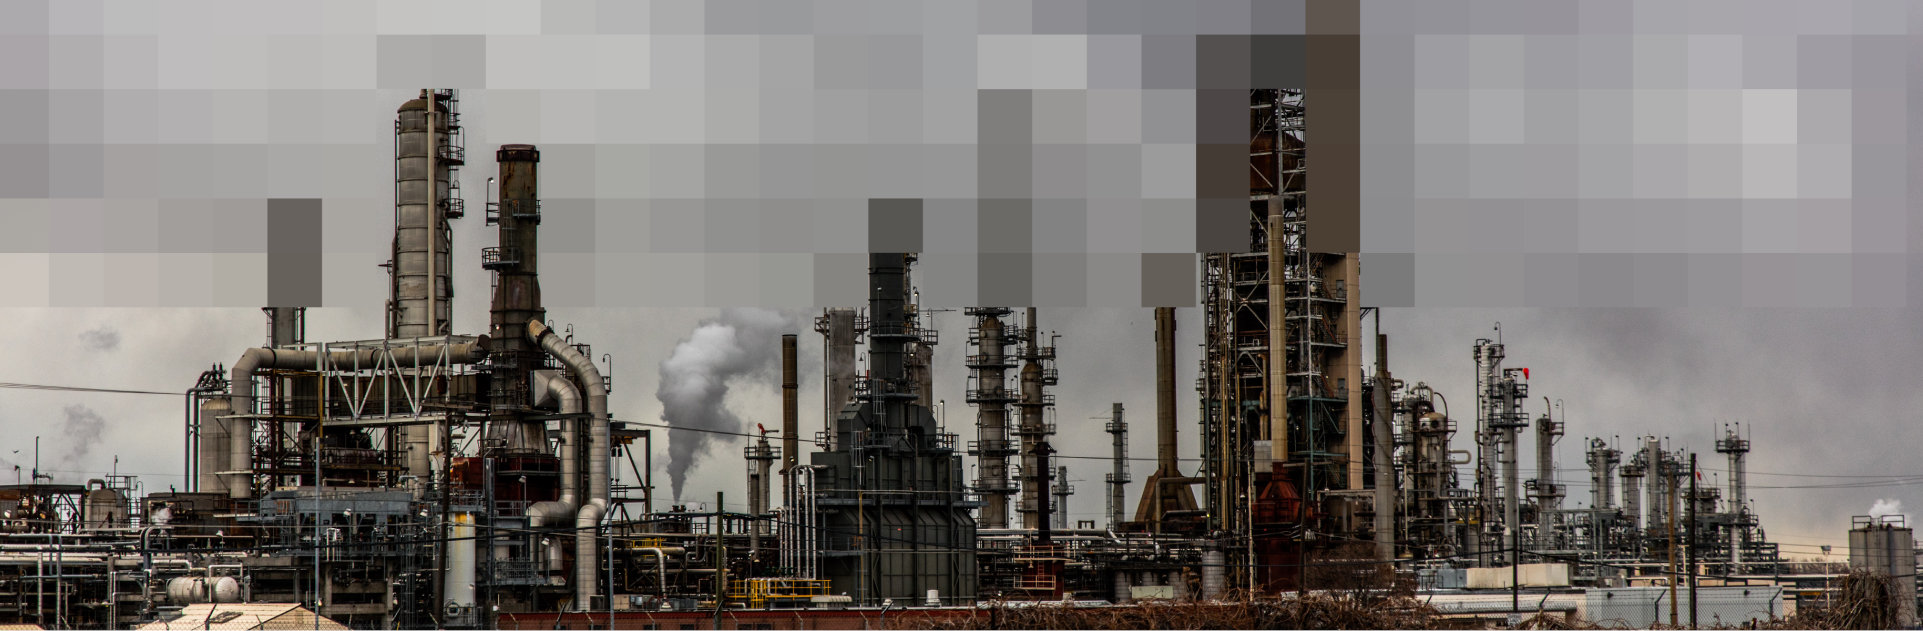 Hydrocarbon pollution from industrial plant